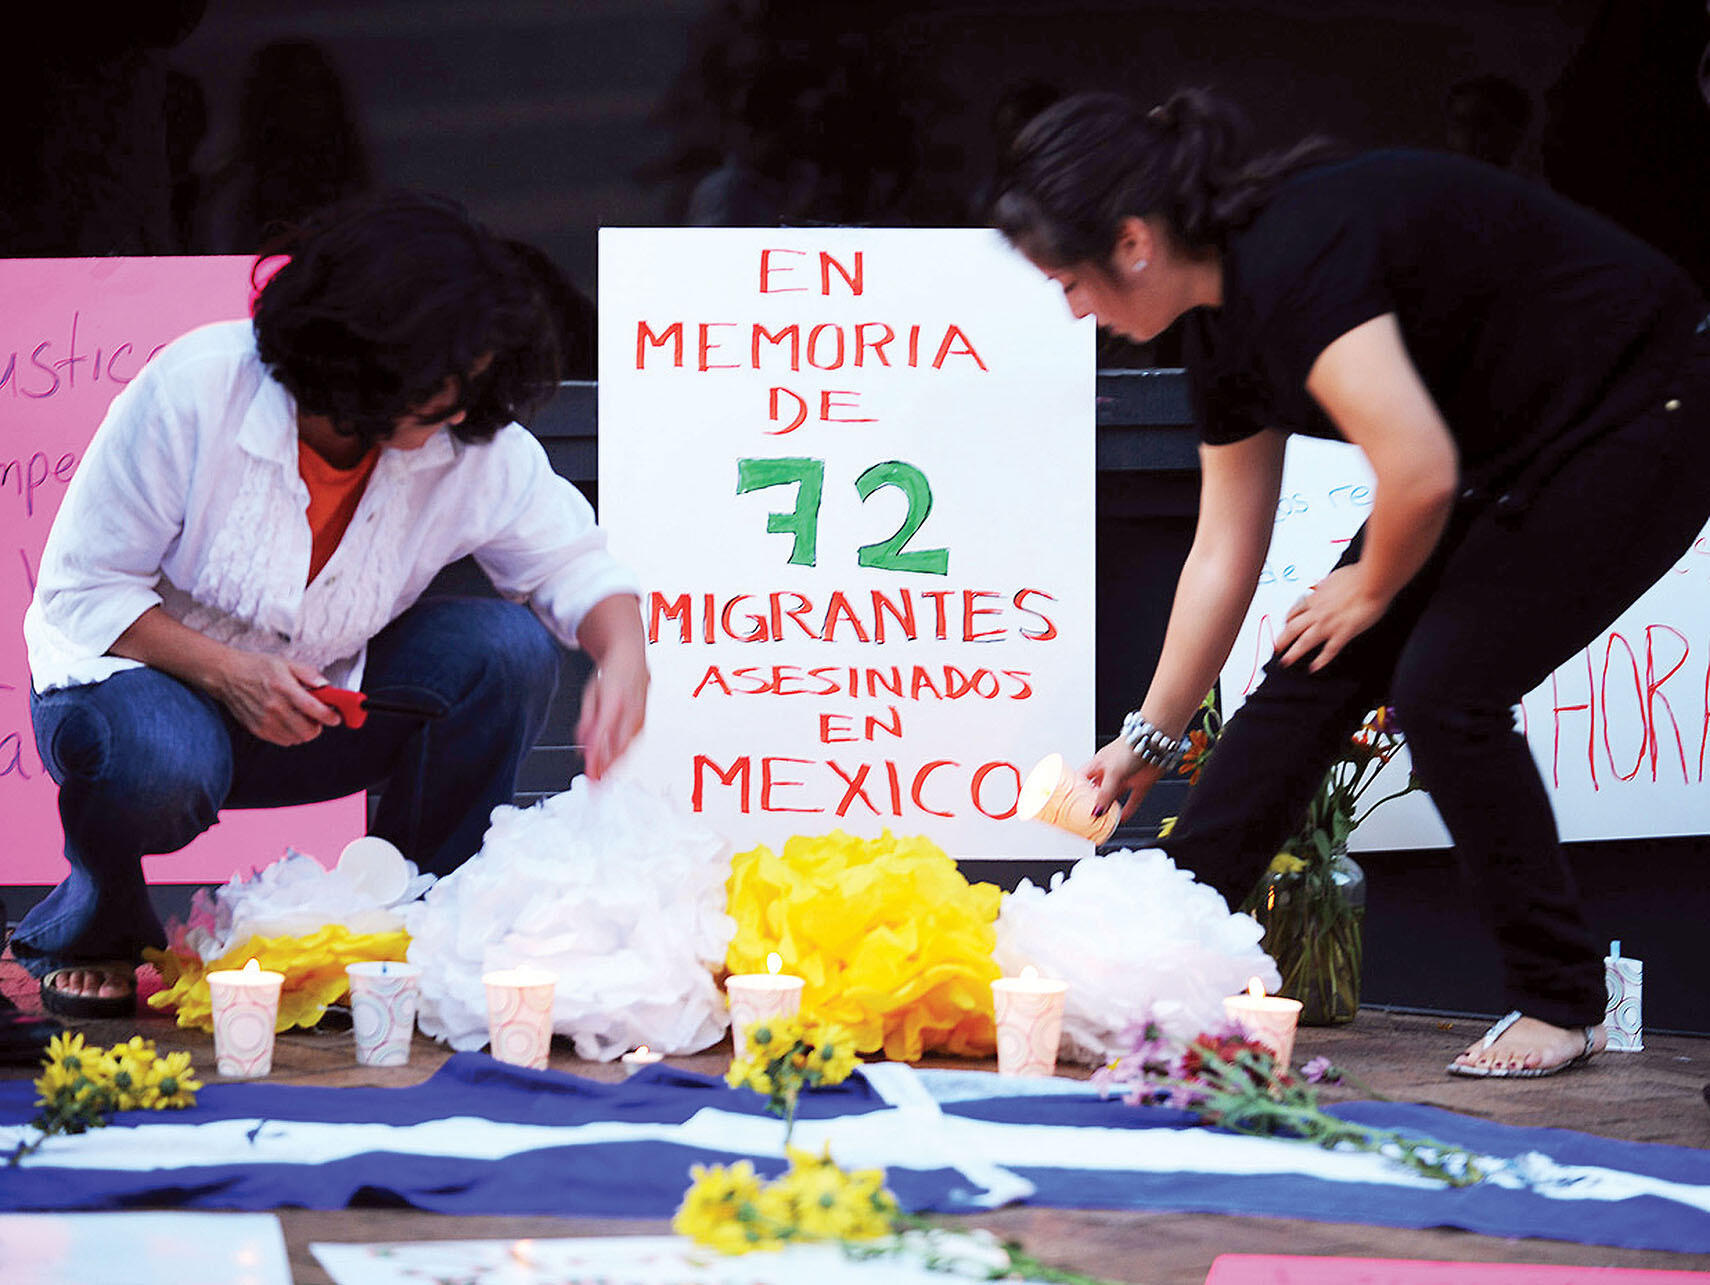 Women stoop to light candles at a street altar for the 72 murdered migrants. (Photo by Lenin Nolly Araujo.)